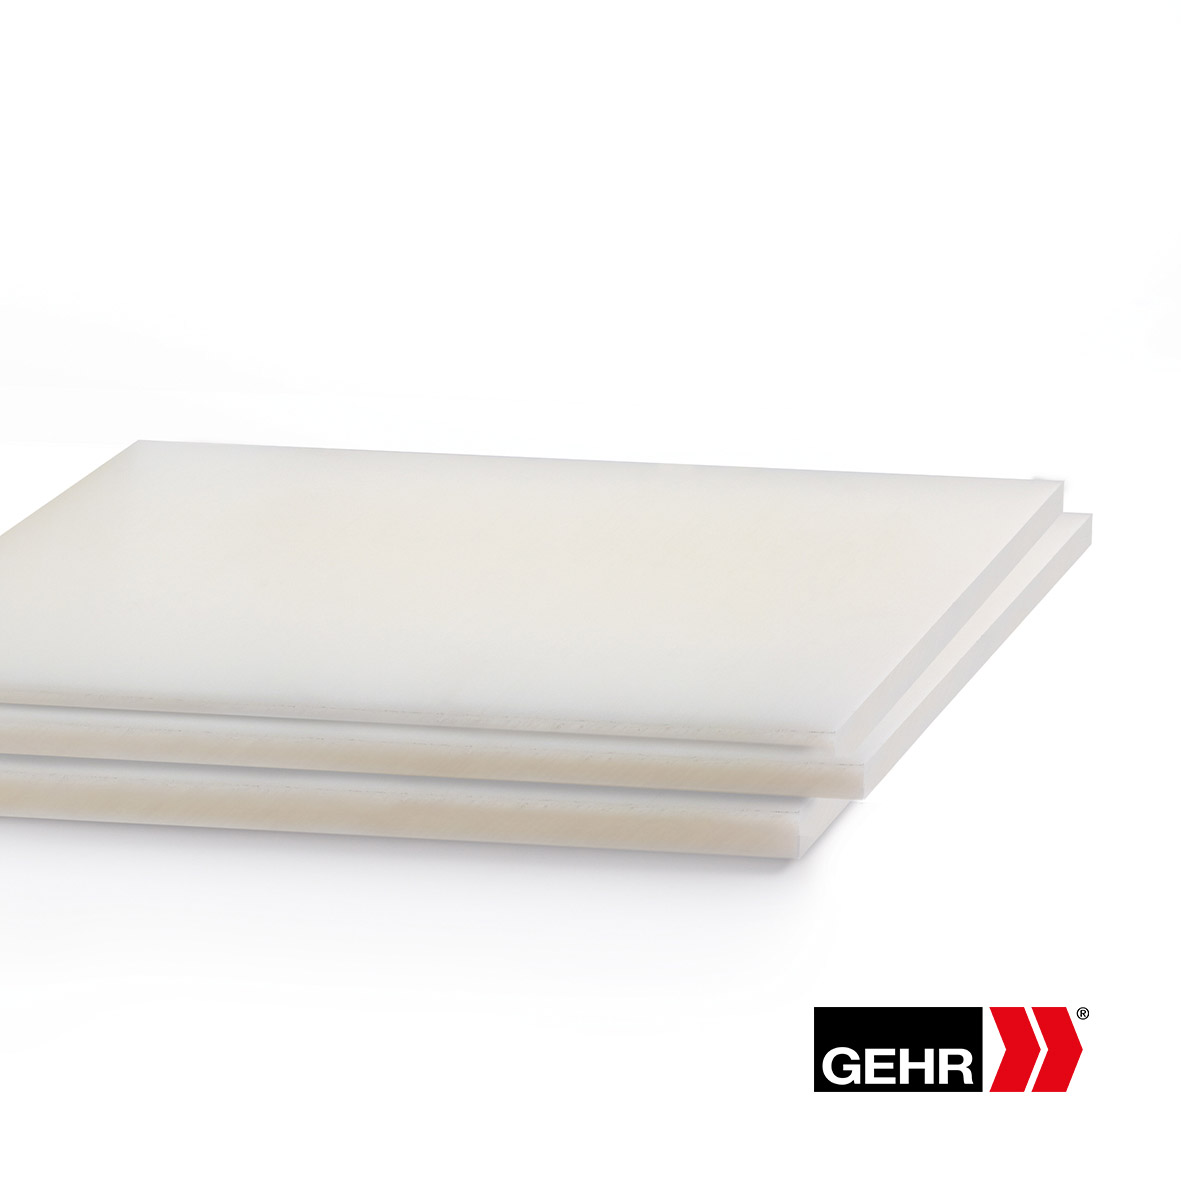 GEHR POM-C Sheets 610 x 12 mm natural